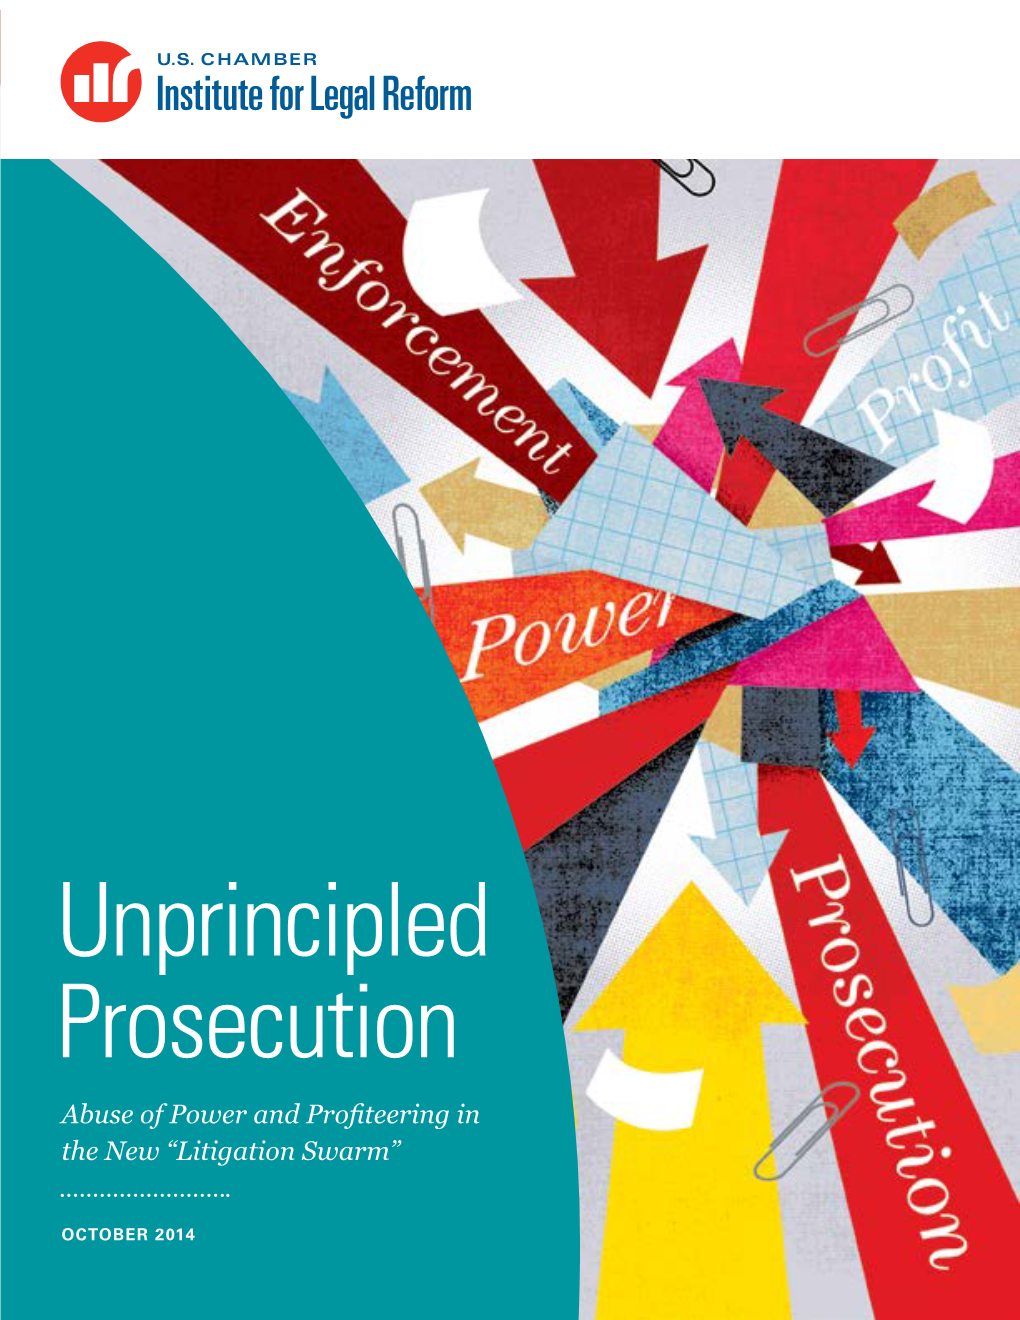 Unprincipled Prosecution Abuse of Power and Profiteering in the New “Litigation Swarm”